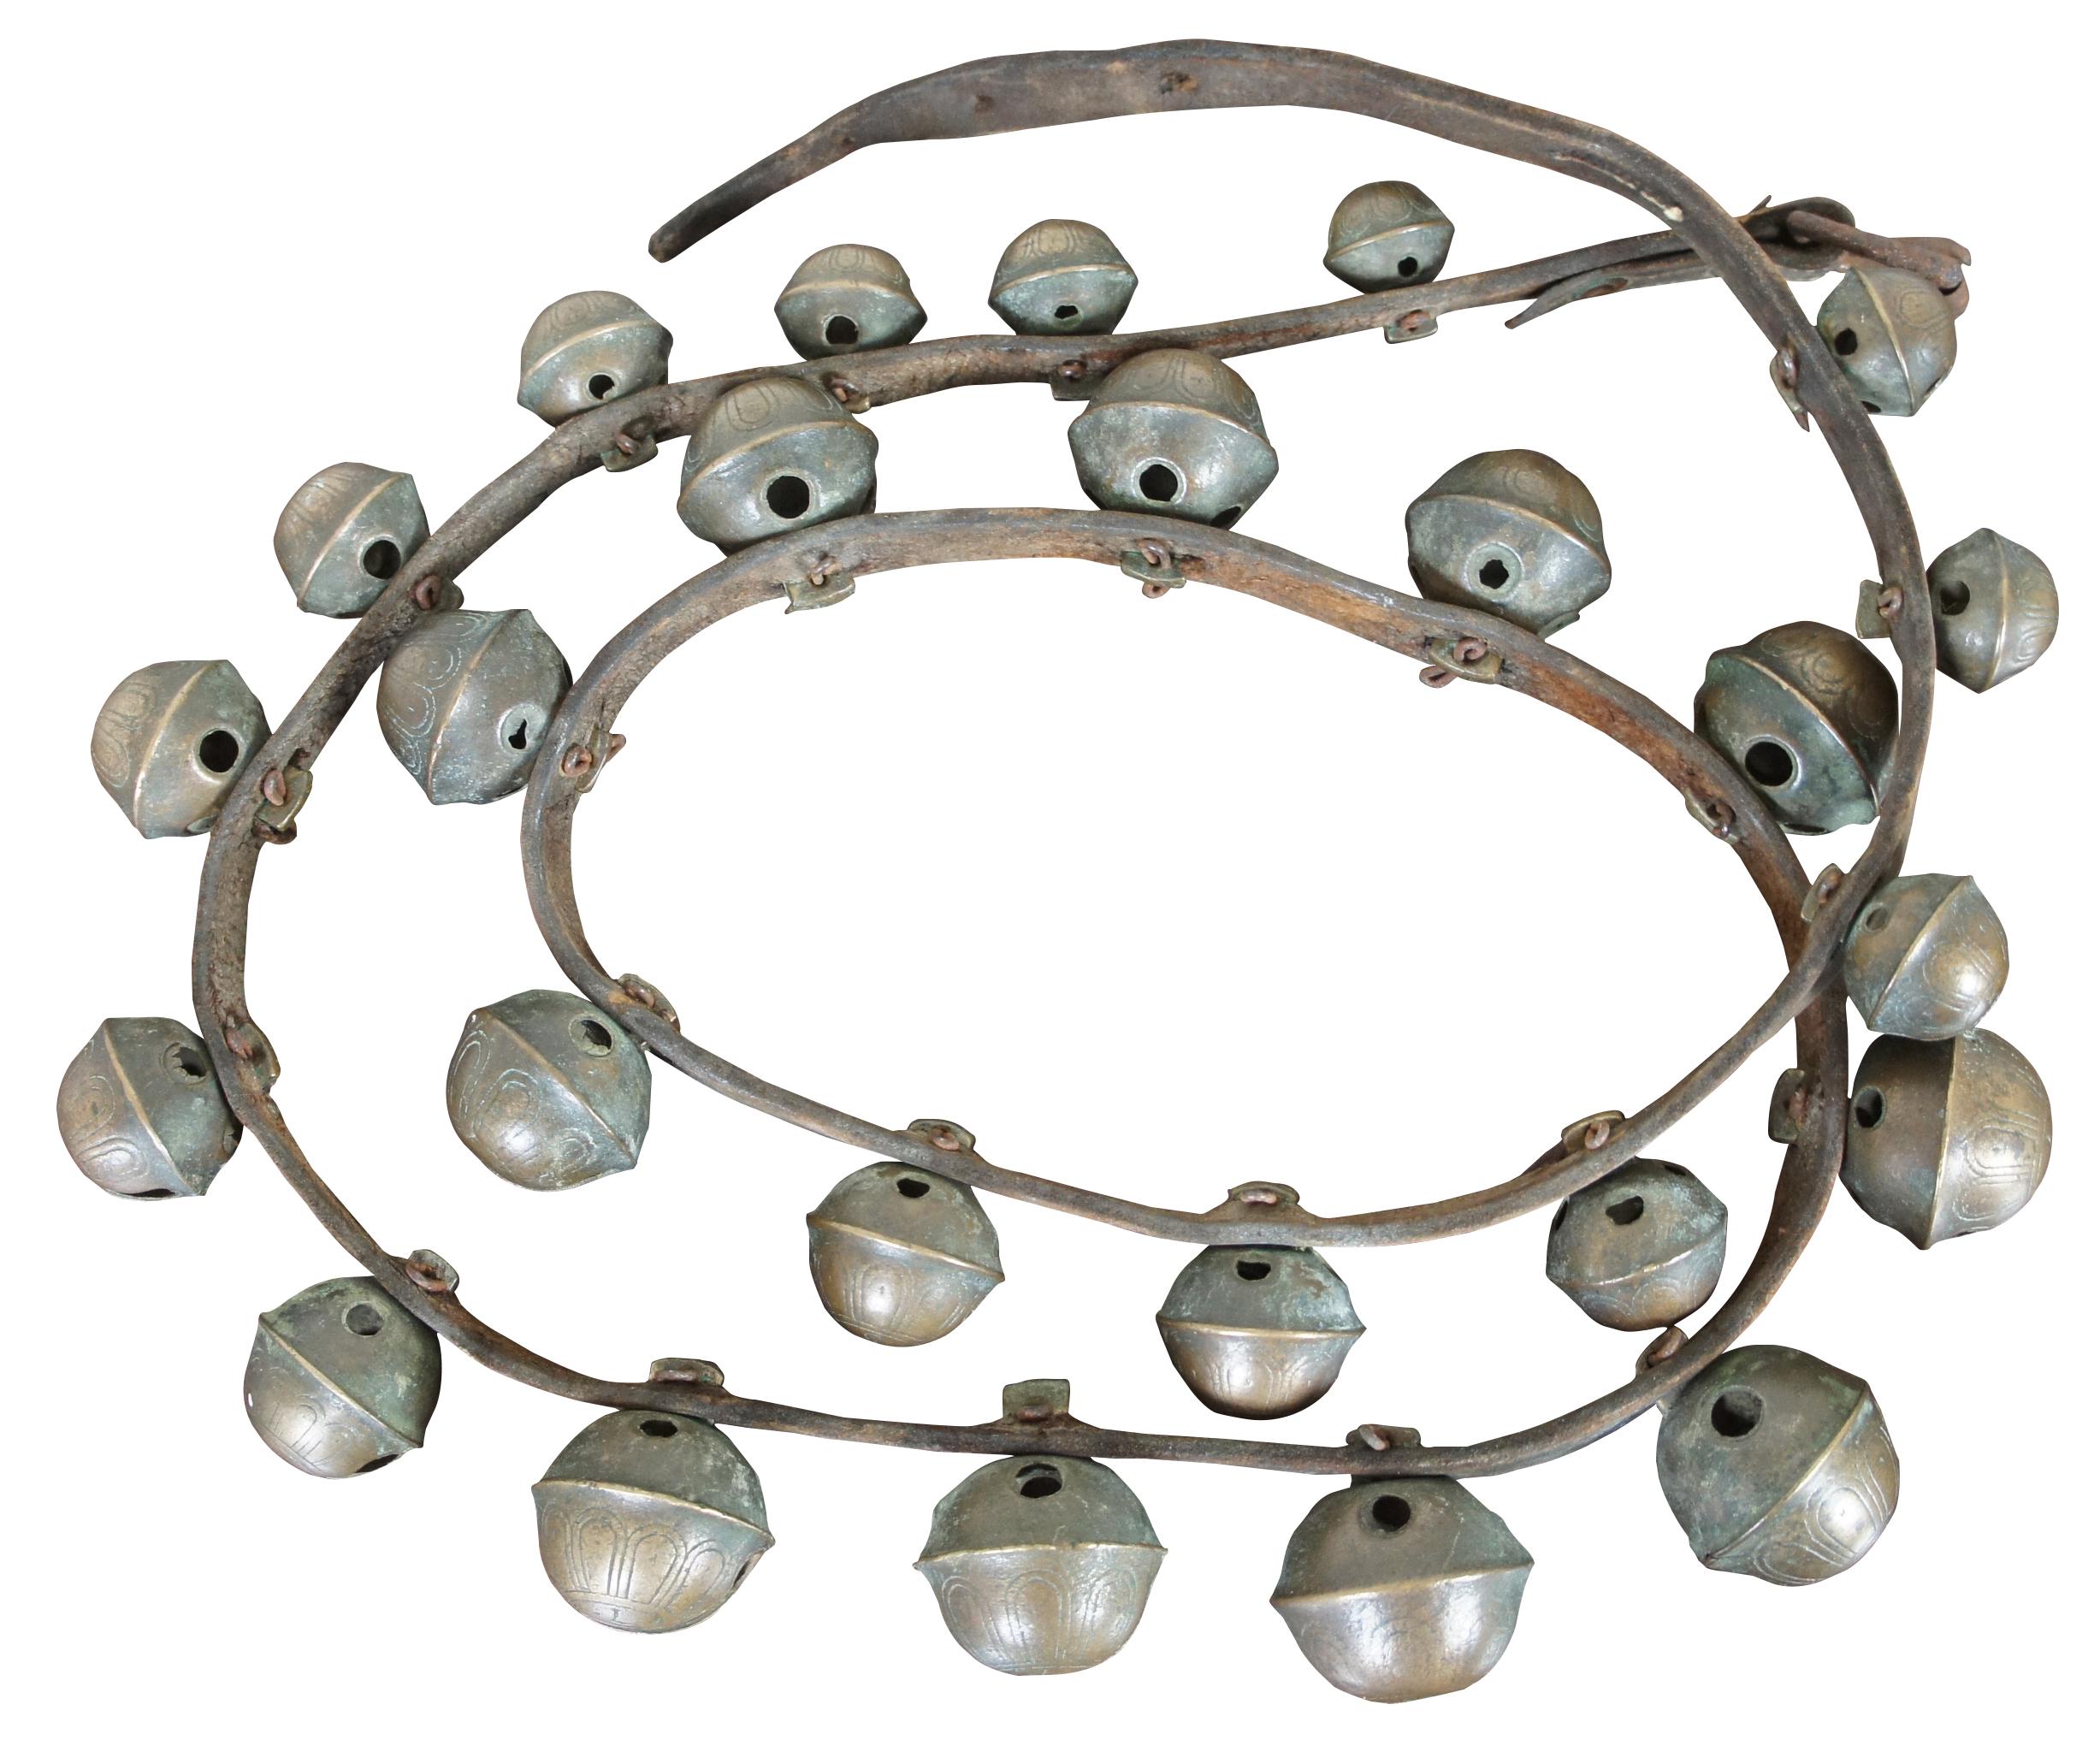 Antique set of graduated brass sleigh bells mounted on a leather belt, ranging from small to large to small again along the length of the belt. Belt has two holes for size adjustment. Measure: 6 ft.

Adjustable length - 67.5” / 69”.